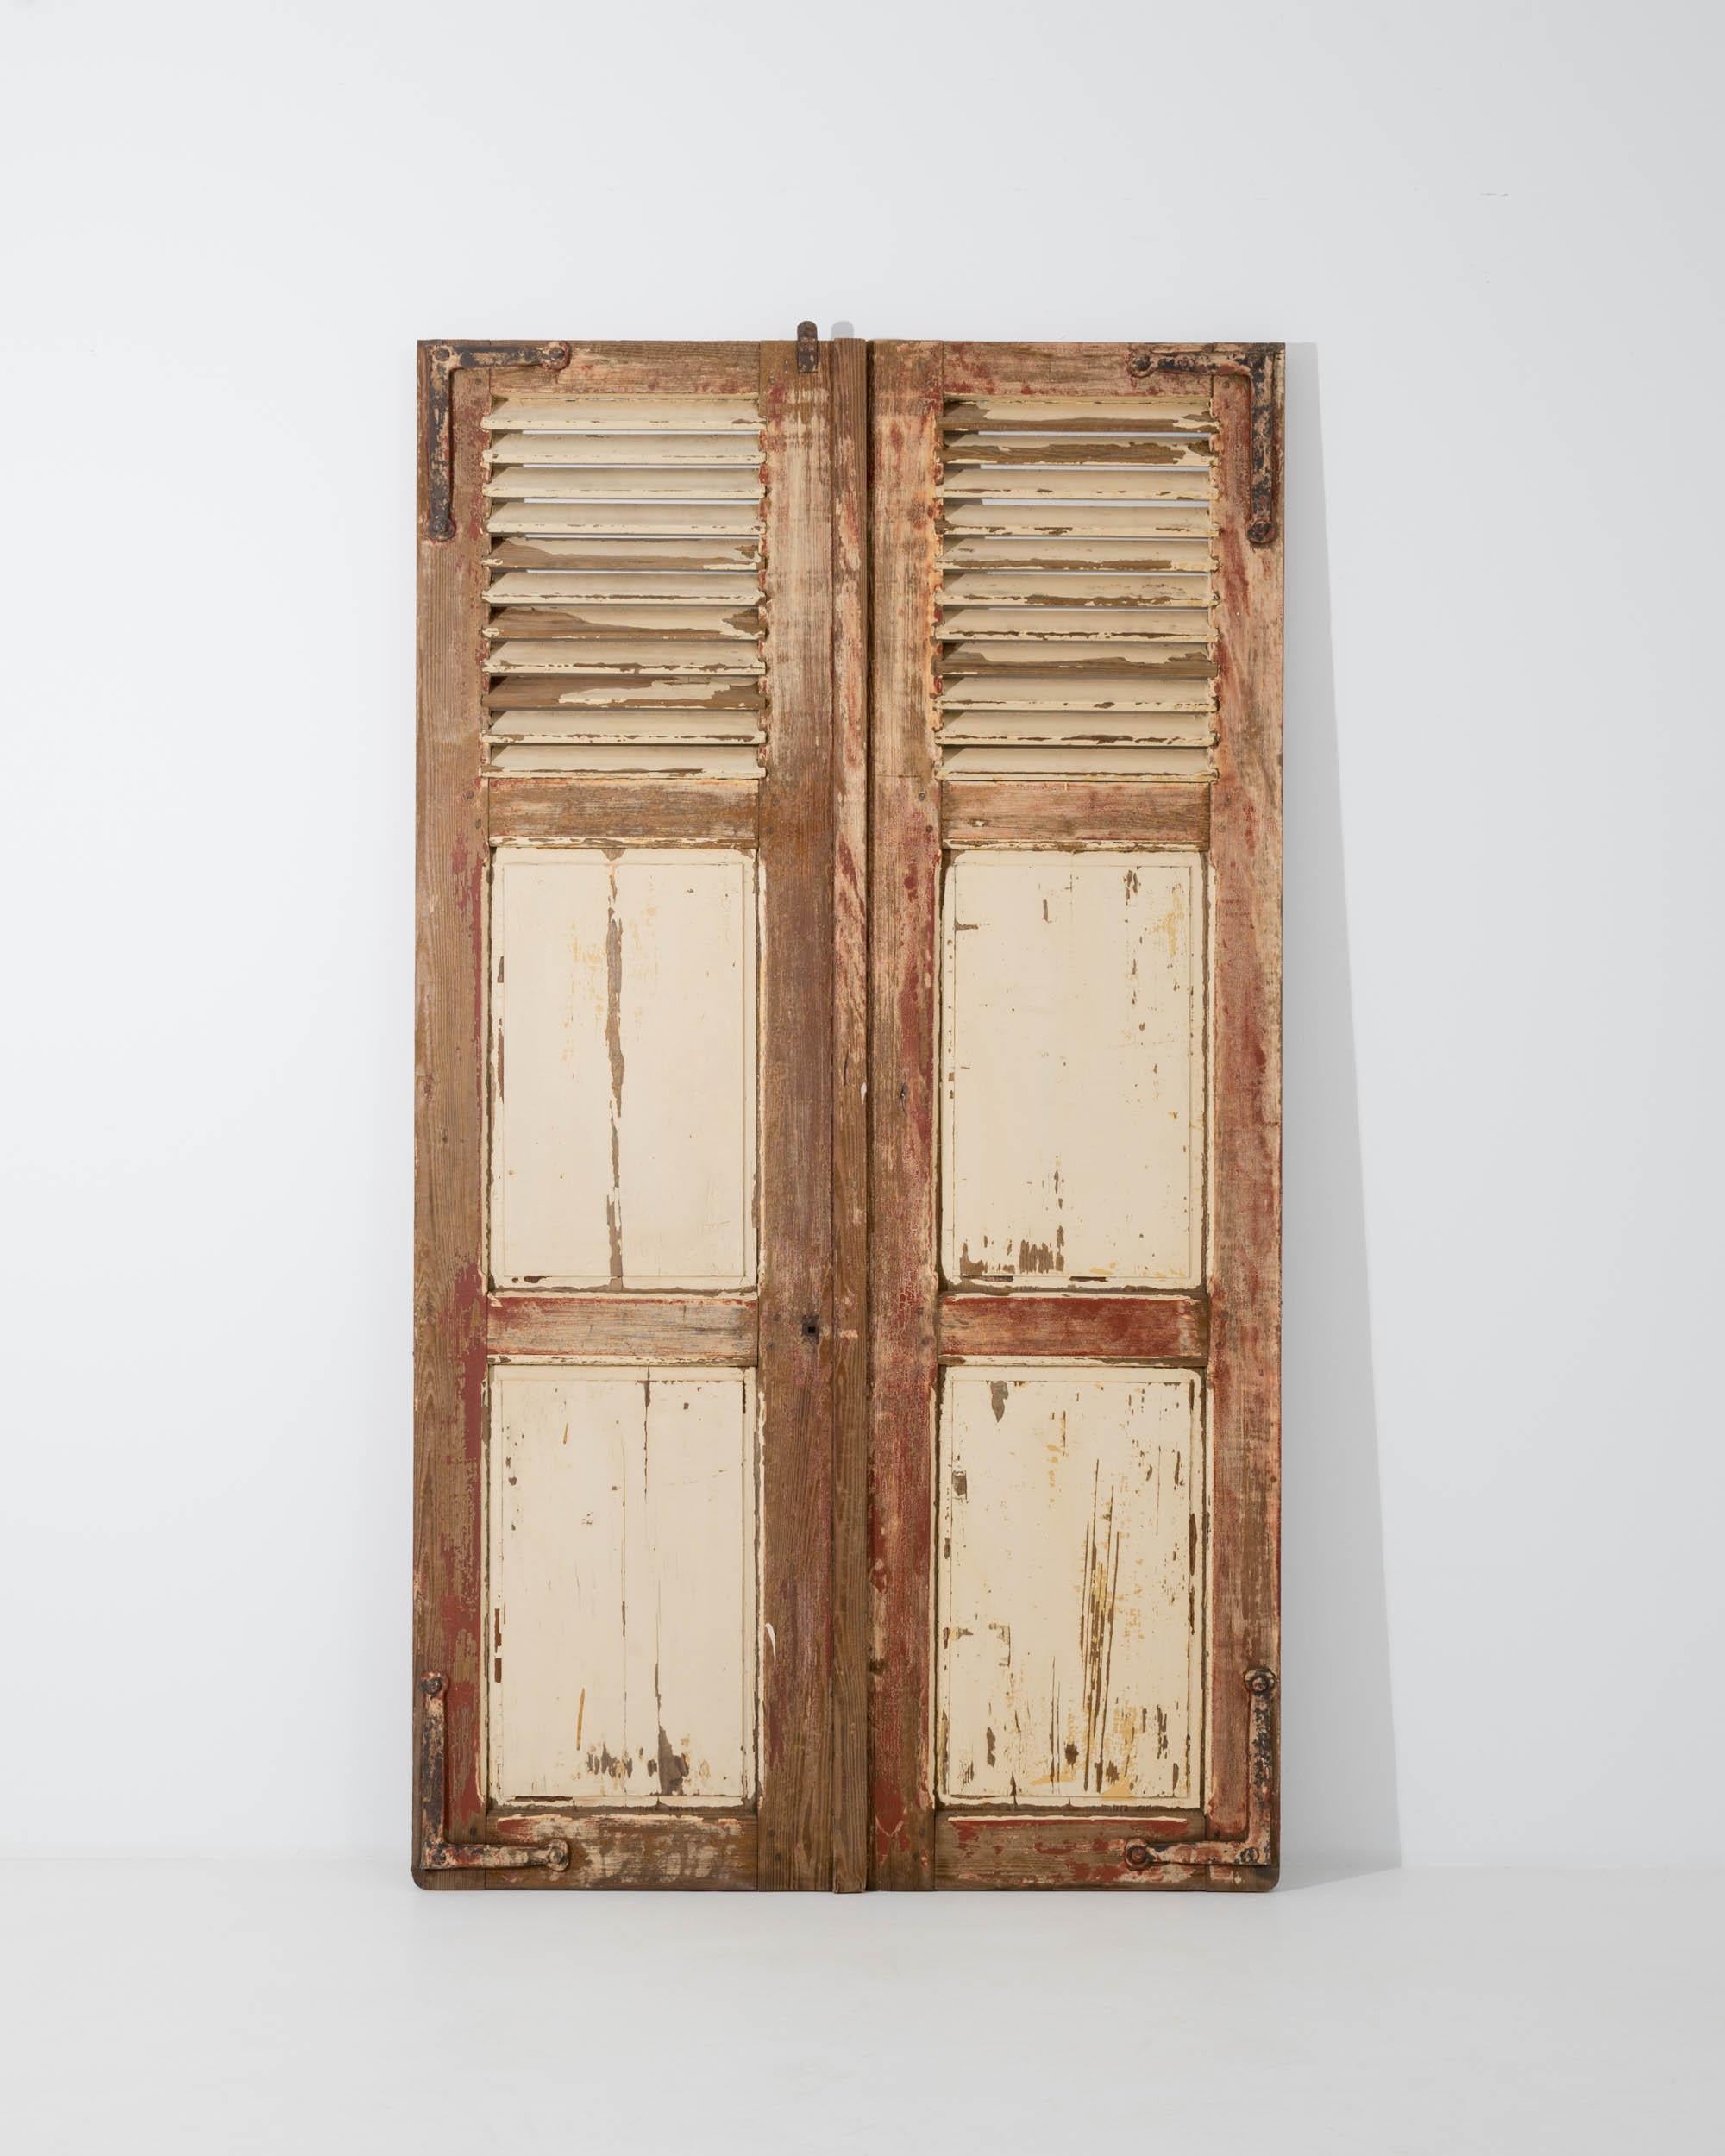 This enchanting pair of antique wooden shutters evokes the romance of a provincial chateau. Made in France in the 1800s, these pieces would have originally served to cover the windows at night-time or during the heat of the summer afternoons. Angled